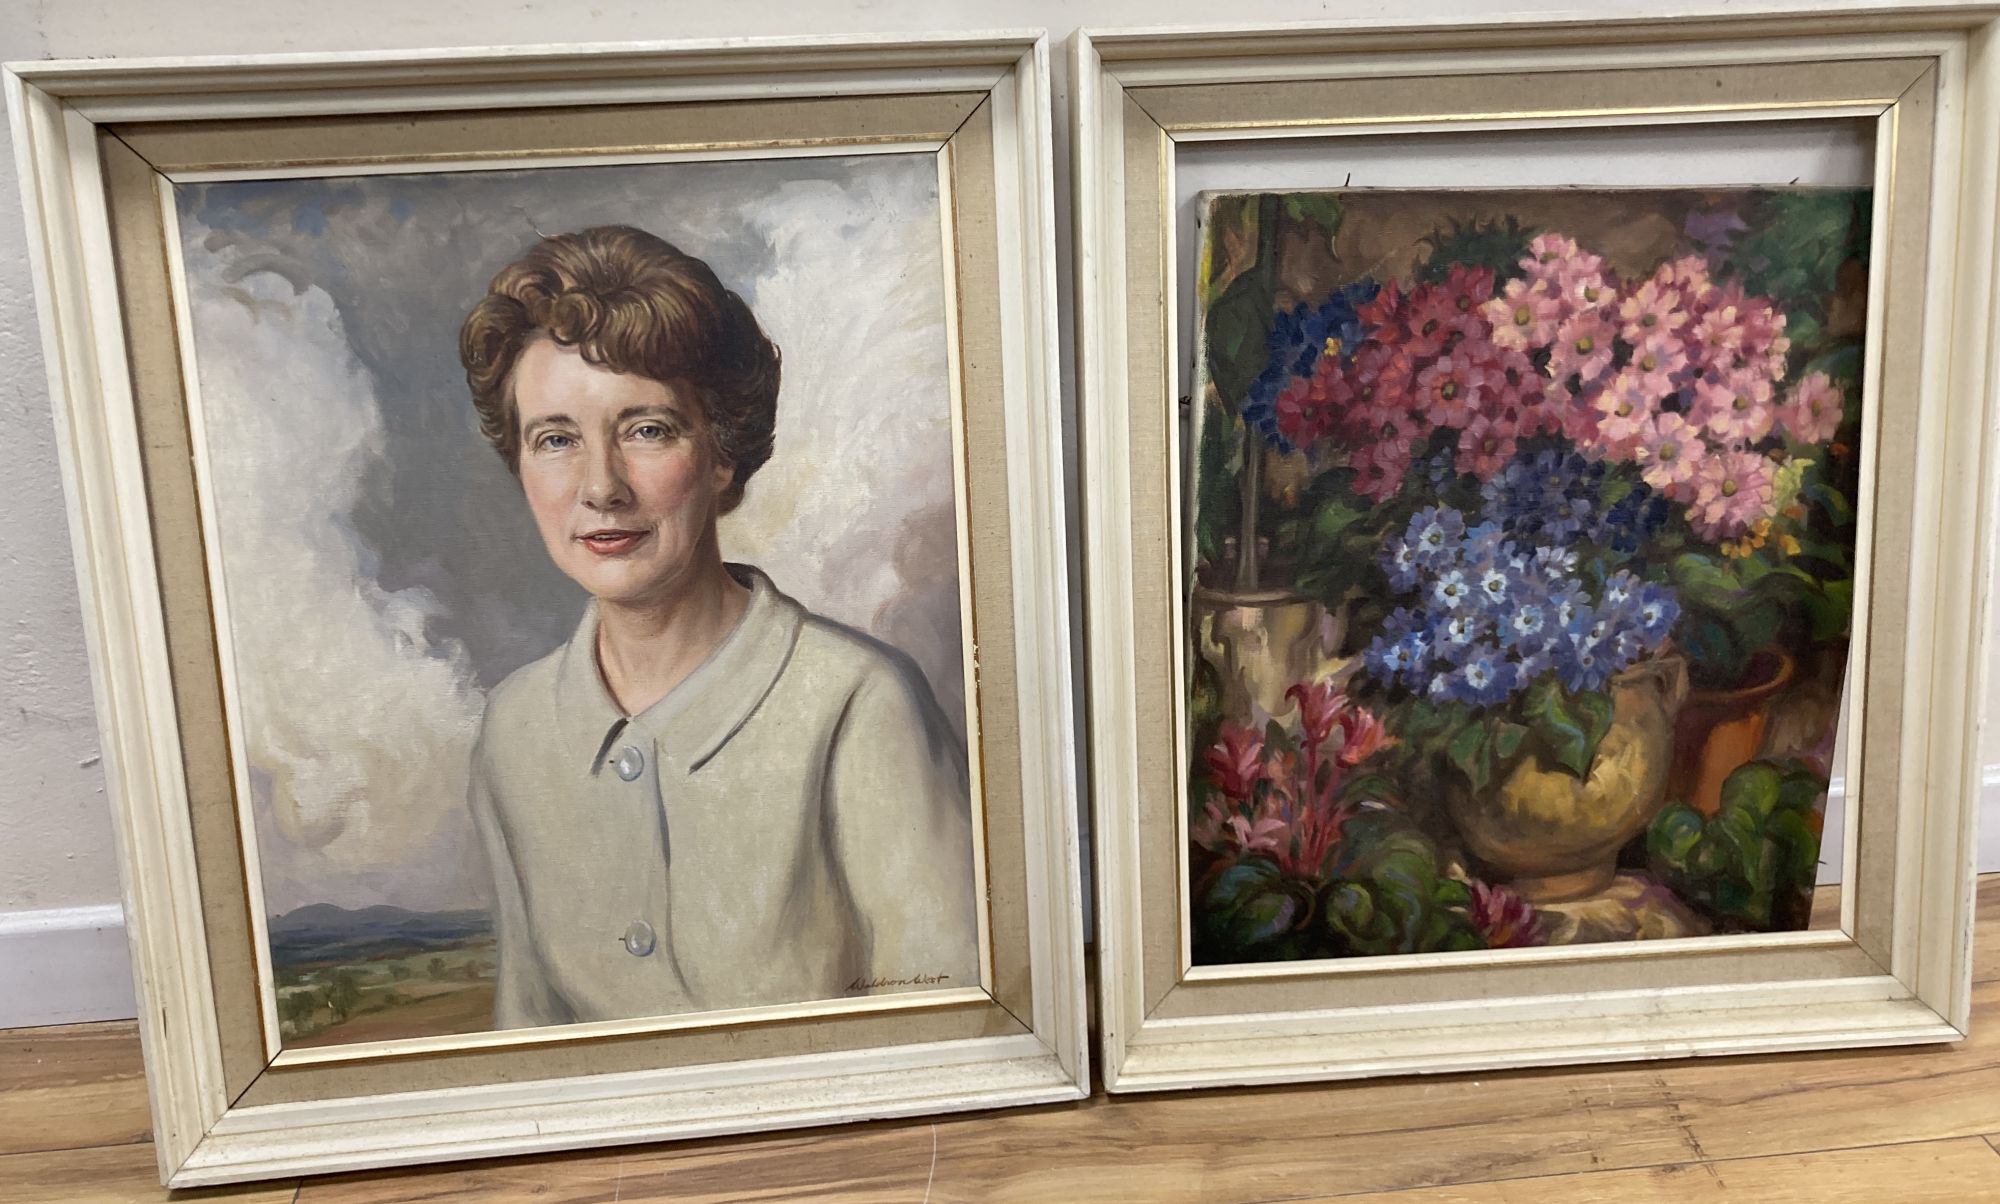 Waldron West, two oils on canvas, Still life of flowers and Portrait of a lady, both signed, 60 x 50cm